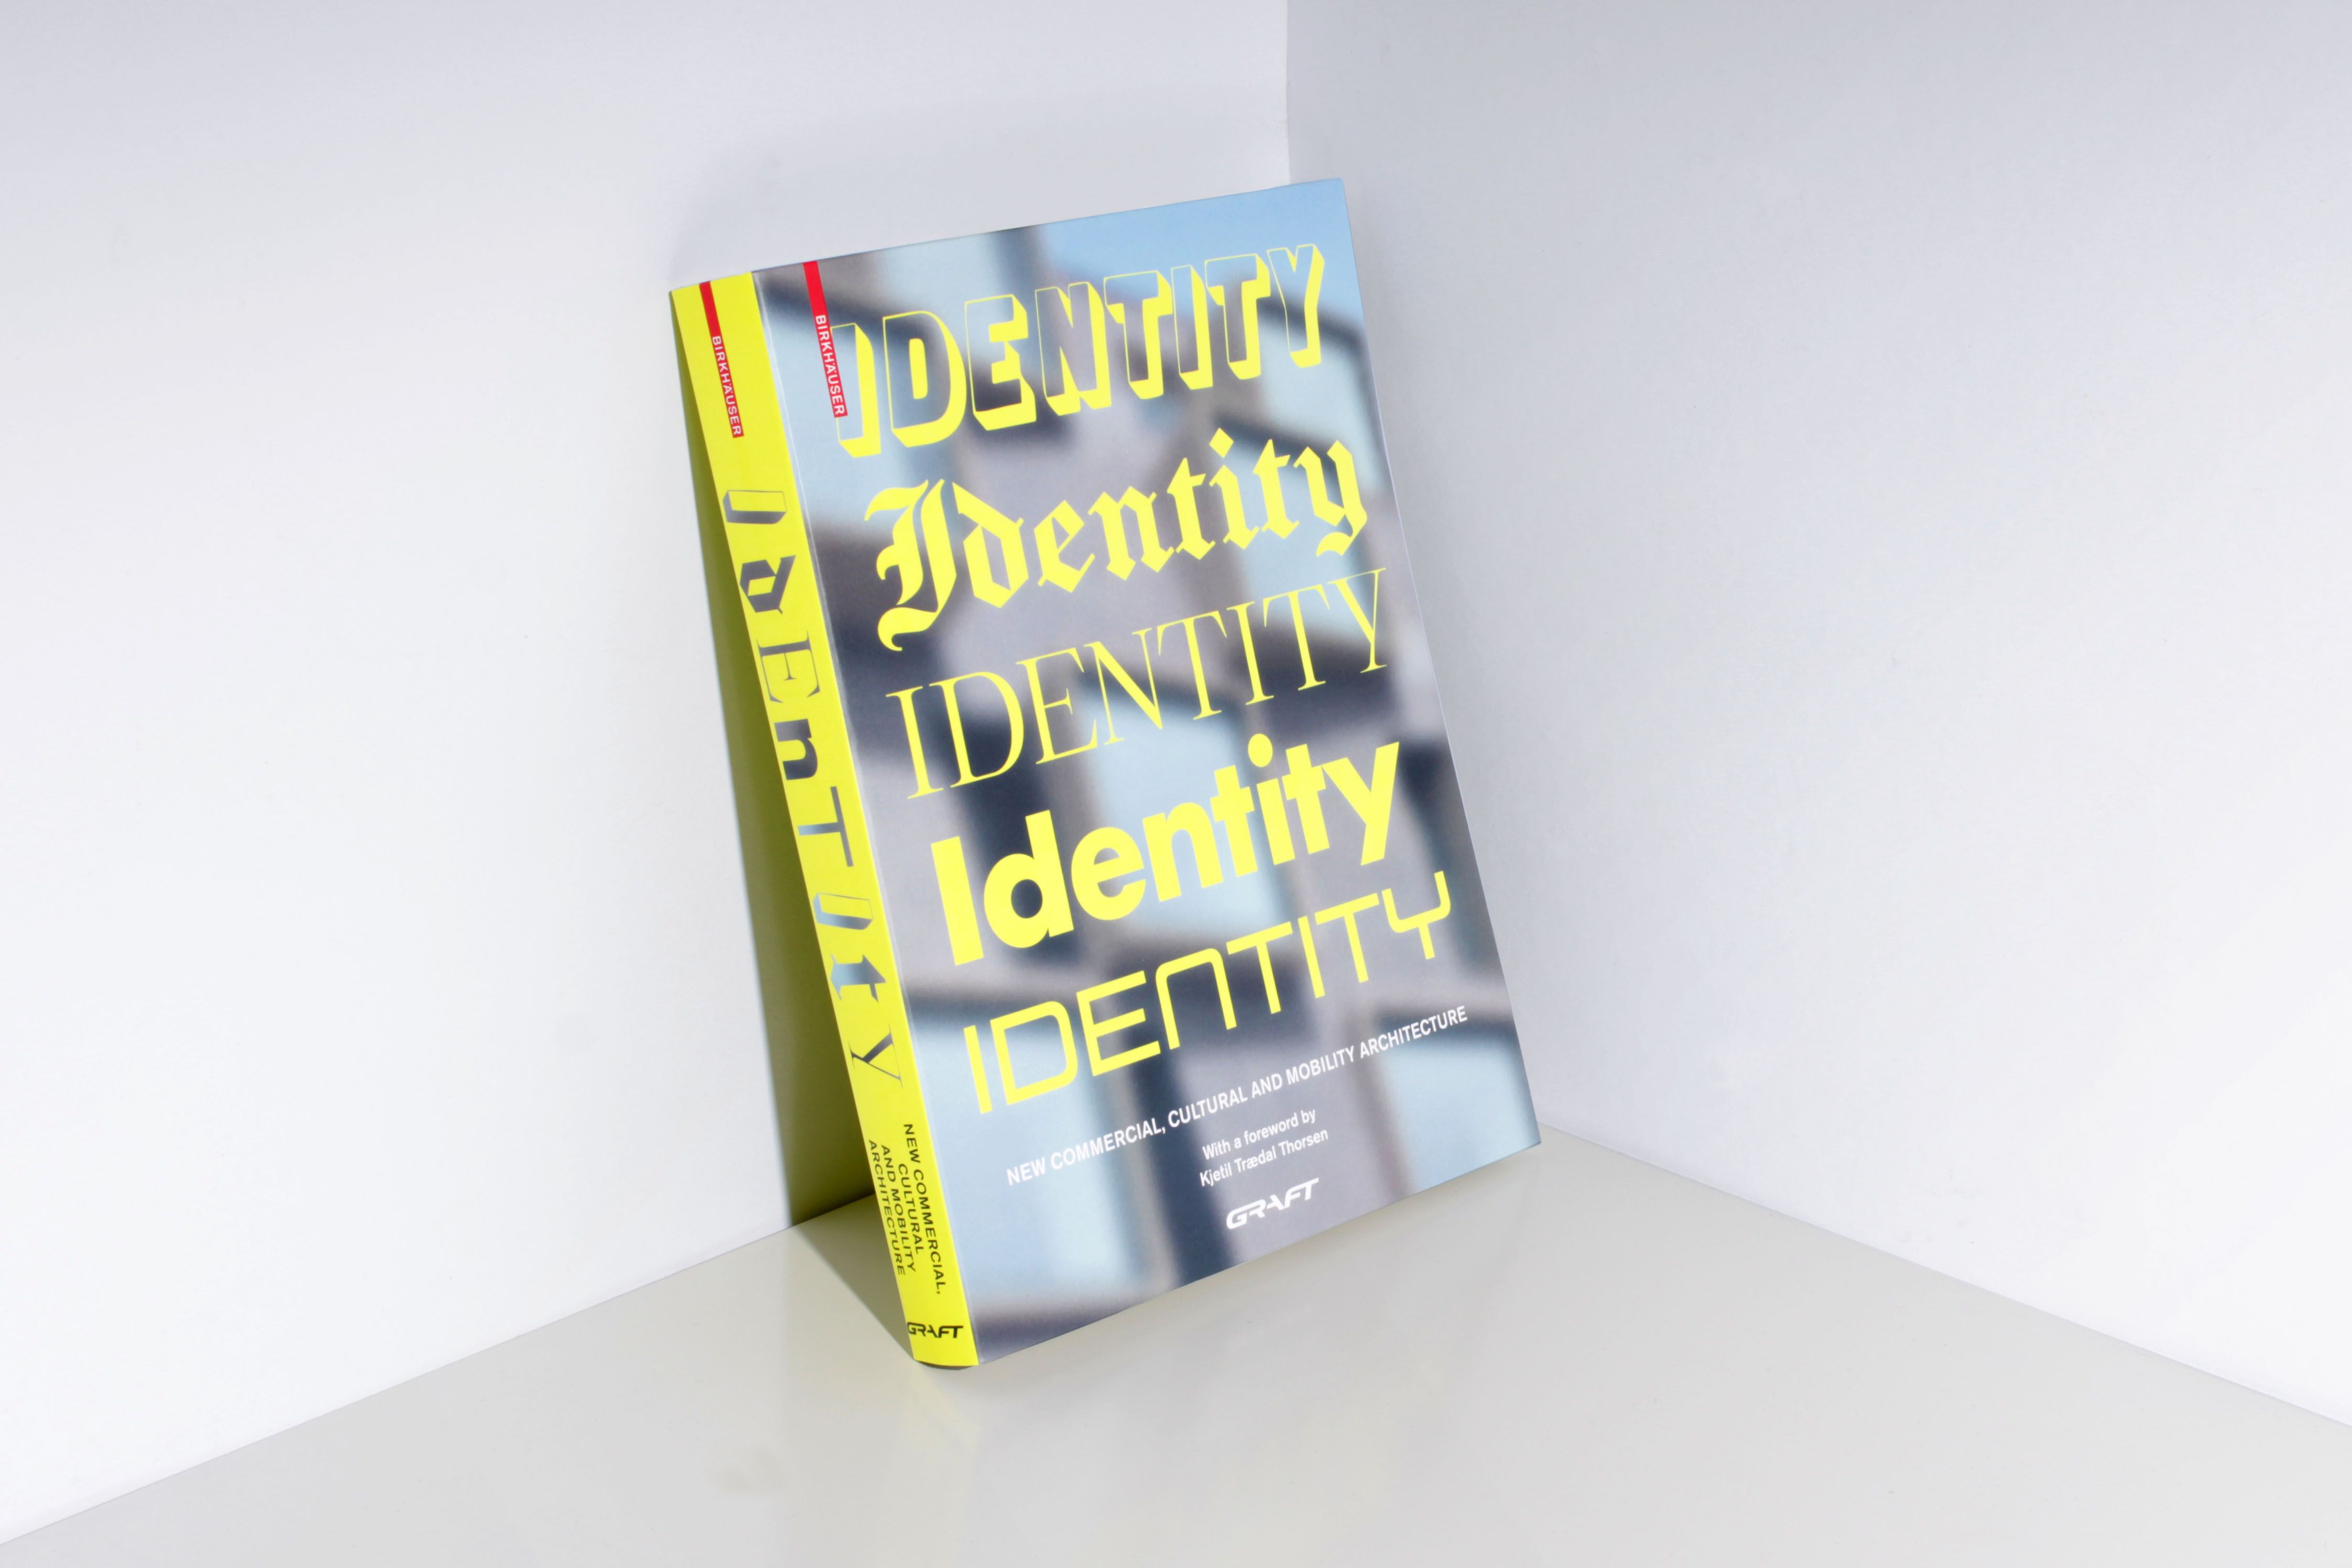 IDENTITY. New Commercial, Cultural and Mobility Architecture Author		GRAFT Project type	Publication Language	English Publisher	Birkhäuser  Paperback	360 pages Published	October 12, 2020  ISBN-10	3035619166 ISBN-13	978-3035619164   The international and multidisciplinary practice GRAFT conceives of itself as a label for architecture, urban design, product design, and music. GRAFT calls itself a "hybrid office" and produces dynamic architectural designs for standard commissions; however, the architects also initiate their own projects and system solutions for tasks with a social, ecological, or esthetic emphasis.